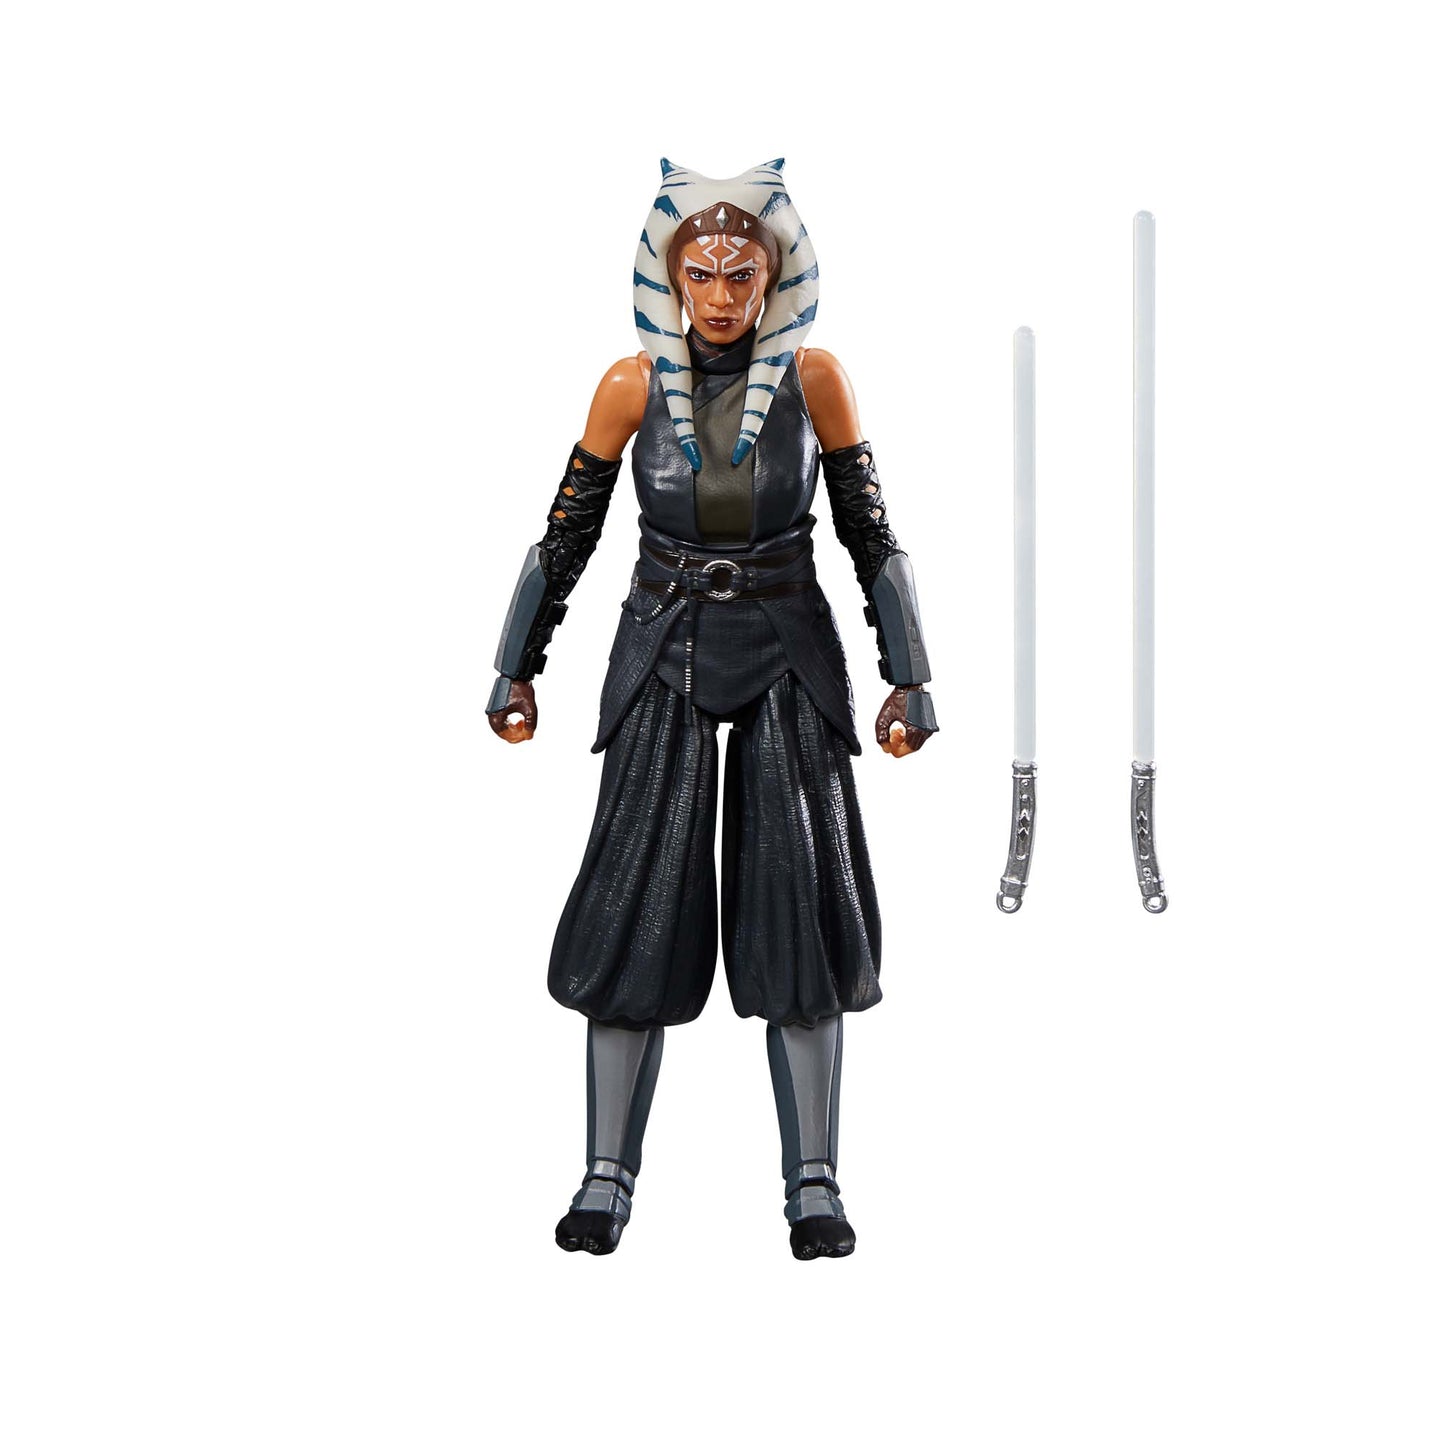 Star Wars The Black Series Ahsoka Tano Action Figure Toy with accessories - Heretoserveyou